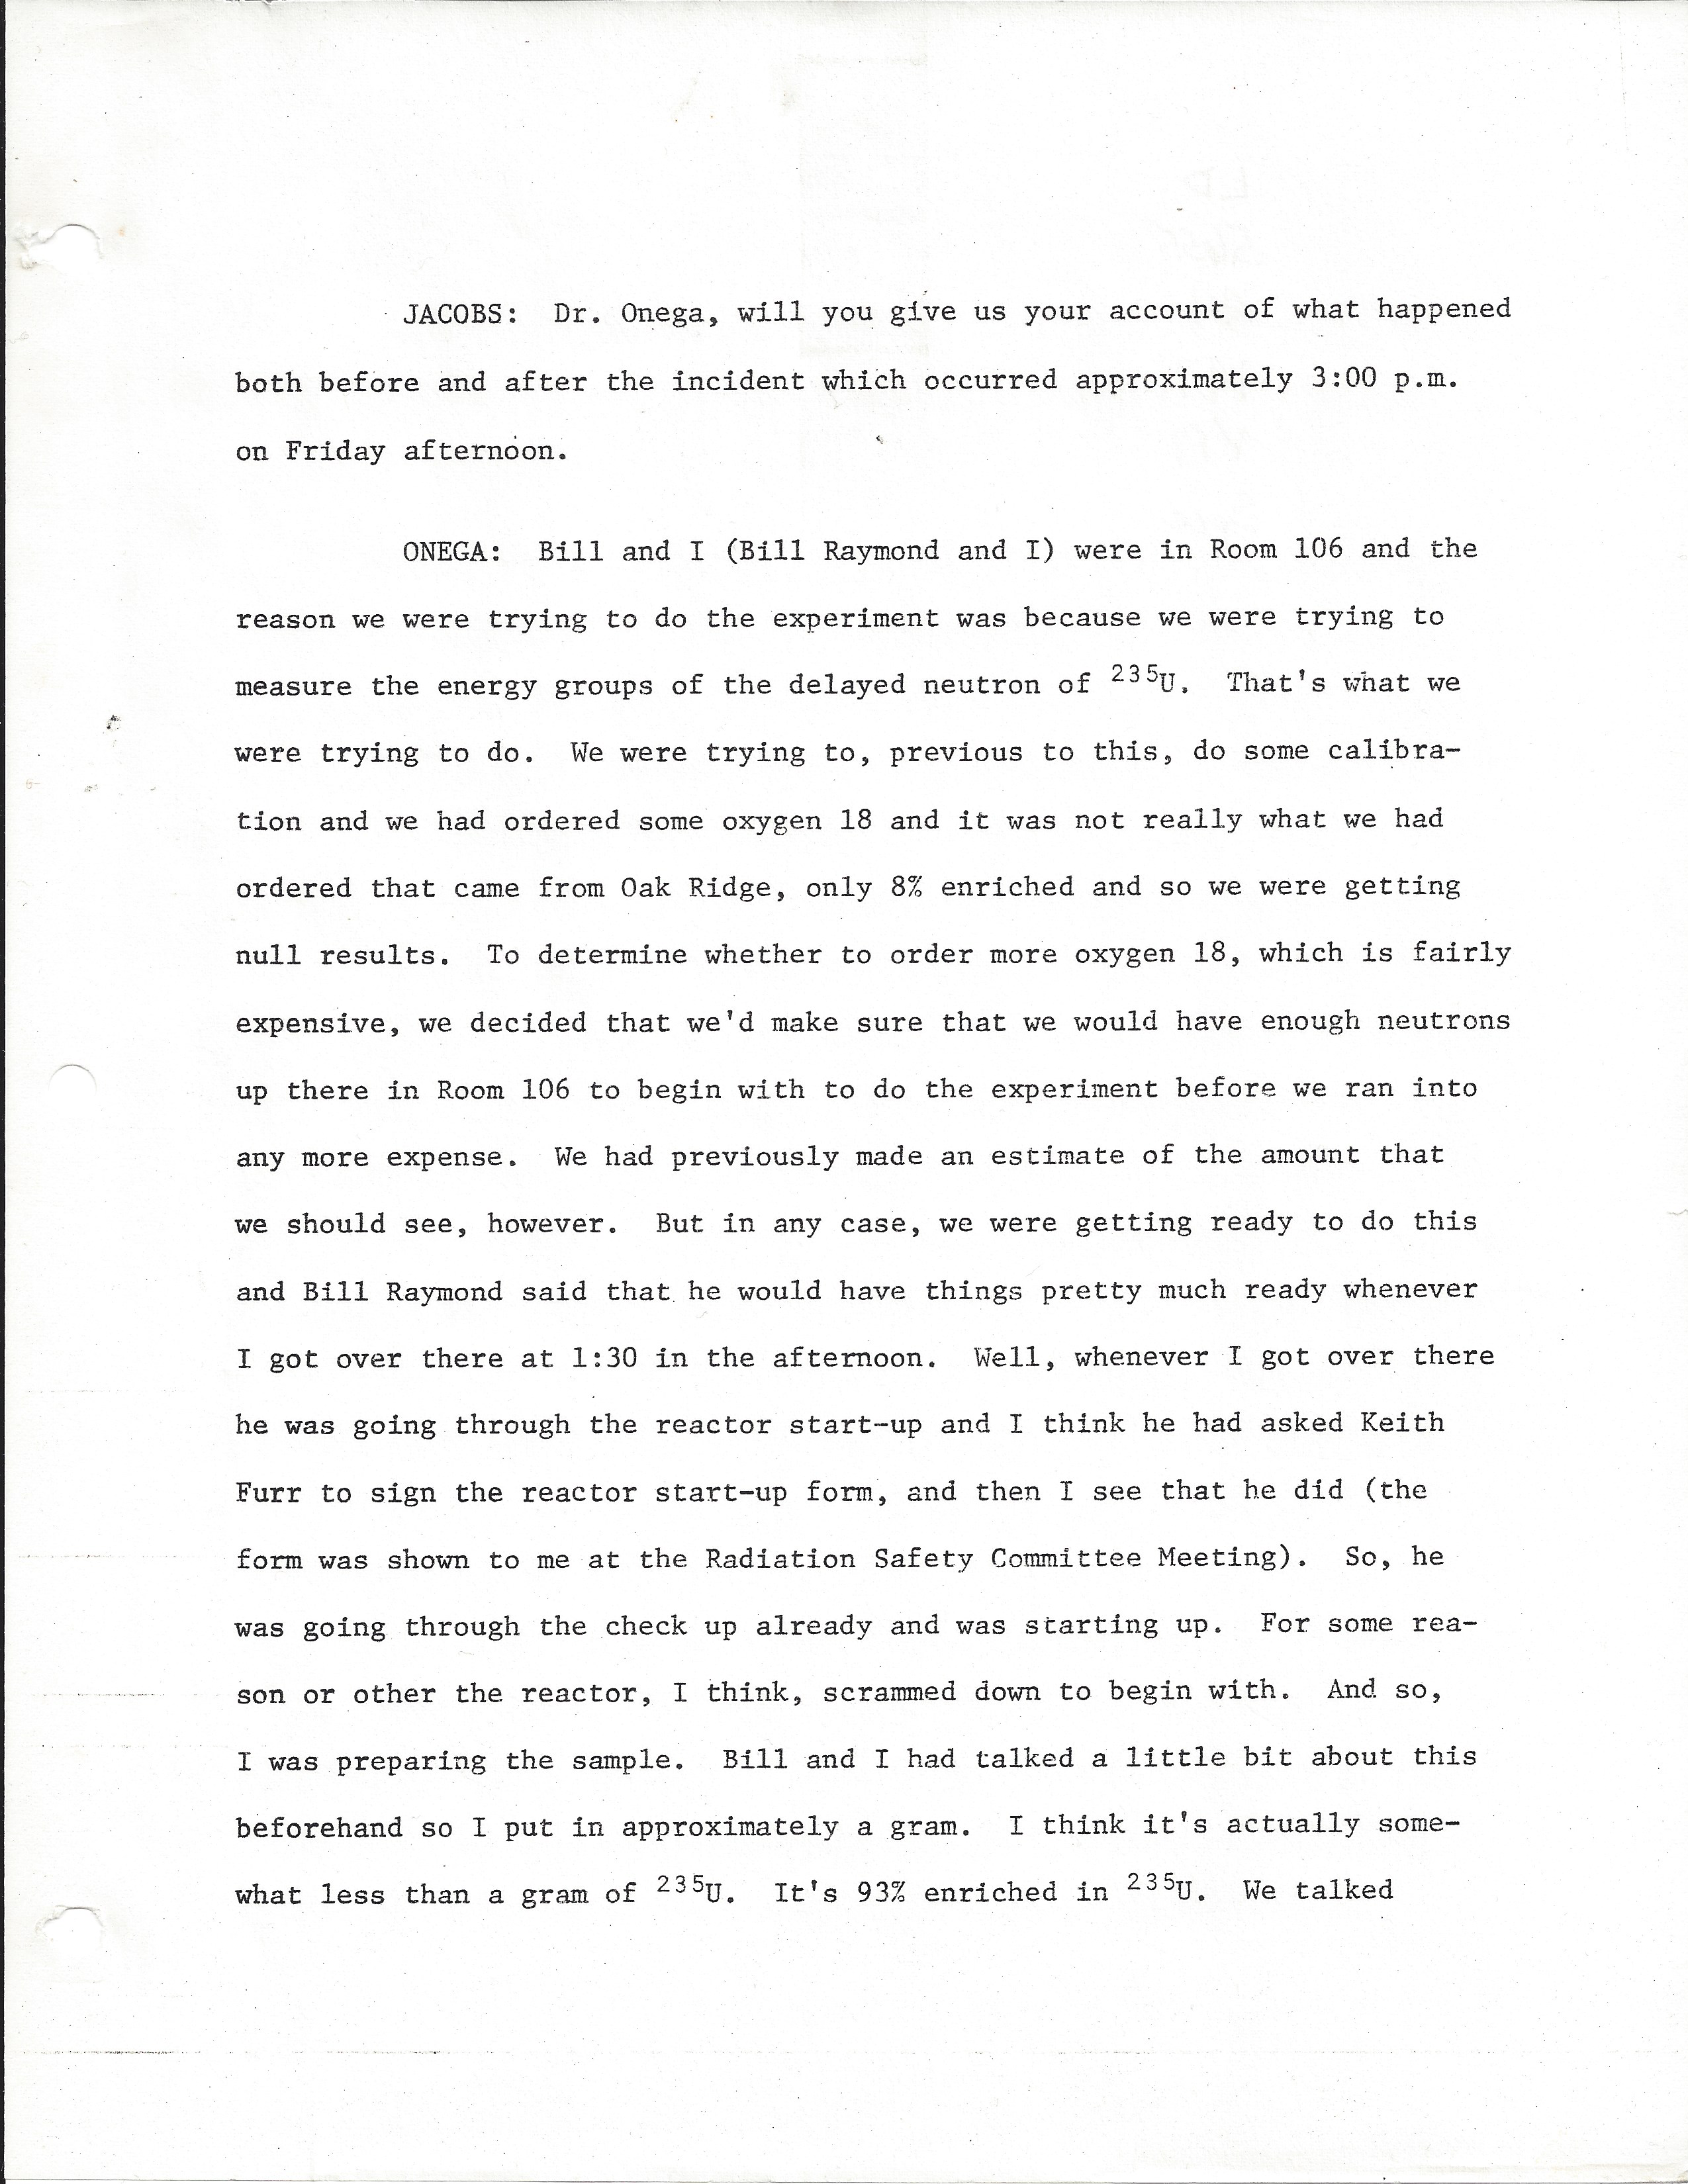 JACOBS: Dr. Onega, will you give us your account of what happened both before and after the incident which occurred approximately 3:00 p.m. on Friday afternoon.  ONEGA: Bill and I (Bill Raymond and I) were in Room 106 and the reason we were trying to do the experiment was because we were trying to measure the energy groups of the delayed neutron of 235U. That's what we were trying to do. We were trying to, previous to this, do some calibration and we had ordered some oxygen 18 and it was not really what we had ordered that came from Oak Ridge, only 8% enriched and so we were getting null results, To determine whether to order more oxygen 18, which is fairly expensive, we decided that we'd make sure that we would have enough neutrons up there in Room 106 to begin with to do the experiment before we ran into  any more expense. We had previously made an estimate of the amount that we should see, however. But in any case, we were getting ready to do this and Bill Raymond said that he would have things pretty much ready whenever I got over there at 1:30 in the afternoon. Well, whenever I got over there he was going through the reactor start-up and I think he had asked Keith Furr to sign the reactor start-up form, and then I see that he did (the form was shown to me at the Radiation Safety Committee Meeting). So, he was going through the check up already and was starting up. For some reason or other the reactor, I think, scrammed down to begin with. And so, I was preparing the sample. Bill and I had talked a little bit about this beforehand so I put in approximately a gram. I think it's actually somewhat less than a gram of 235U. It's 93% enriched in 235U. We talked